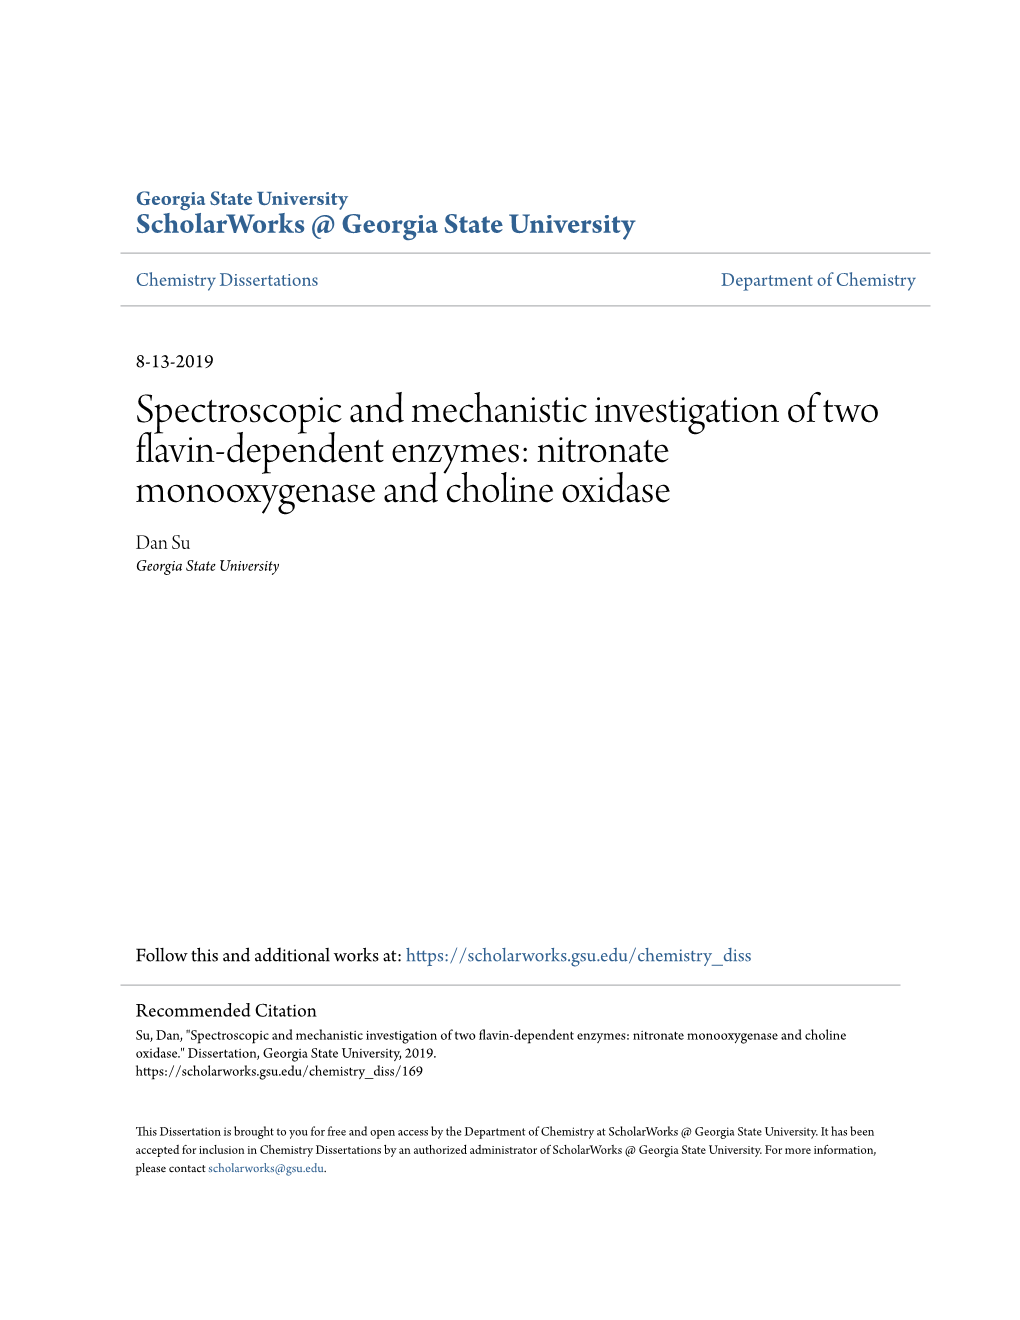 Spectroscopic and Mechanistic Investigation of Two Flavin-Dependent Enzymes: Nitronate Monooxygenase and Choline Oxidase Dan Su Georgia State University